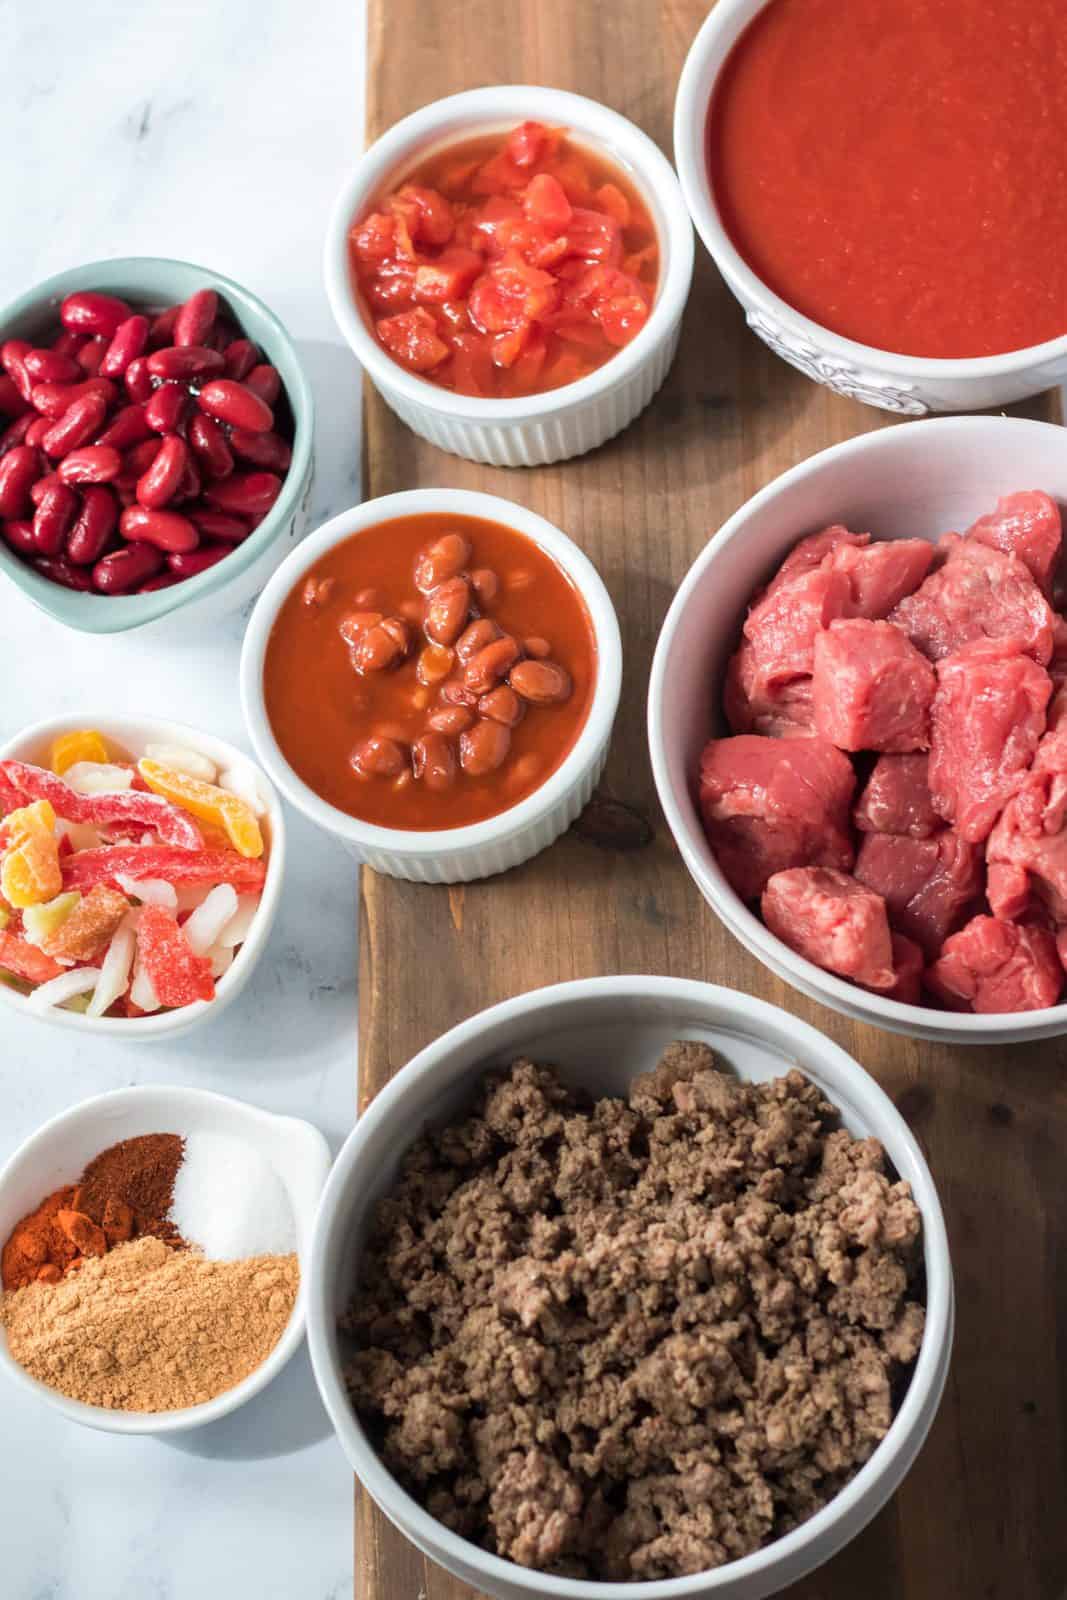 Ingredients needed: stew beef, ground beef, tomatoes with green chiles, tomato sauce, dark red kidney beans, chili beans, frozen mixed peppers and onions, taco seasoning, chili powder, paprika and granulated sugar.